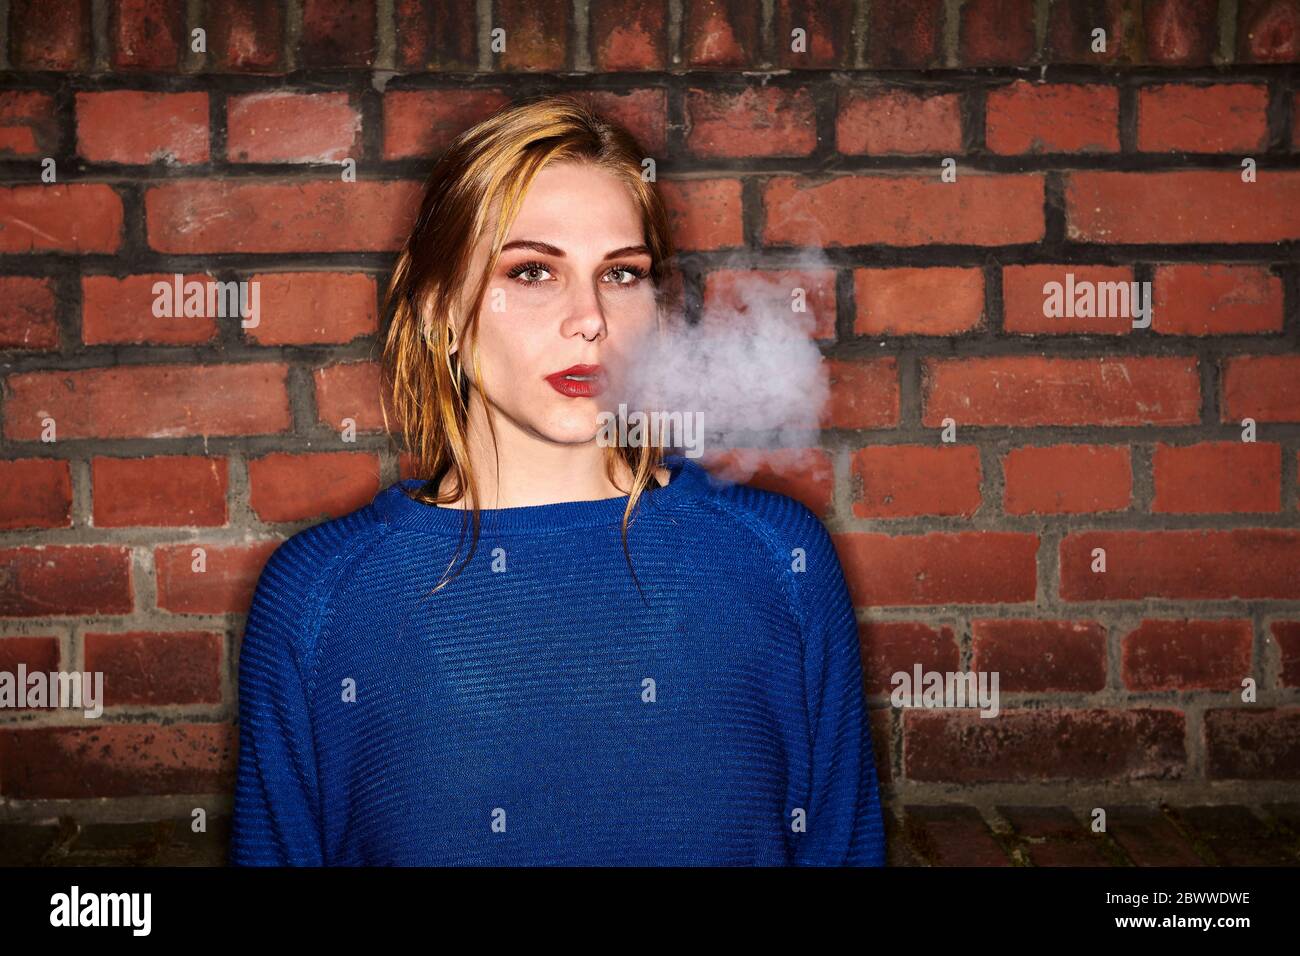 Portrait of young woman exhaling smoke against brick wall at night Stock Photo